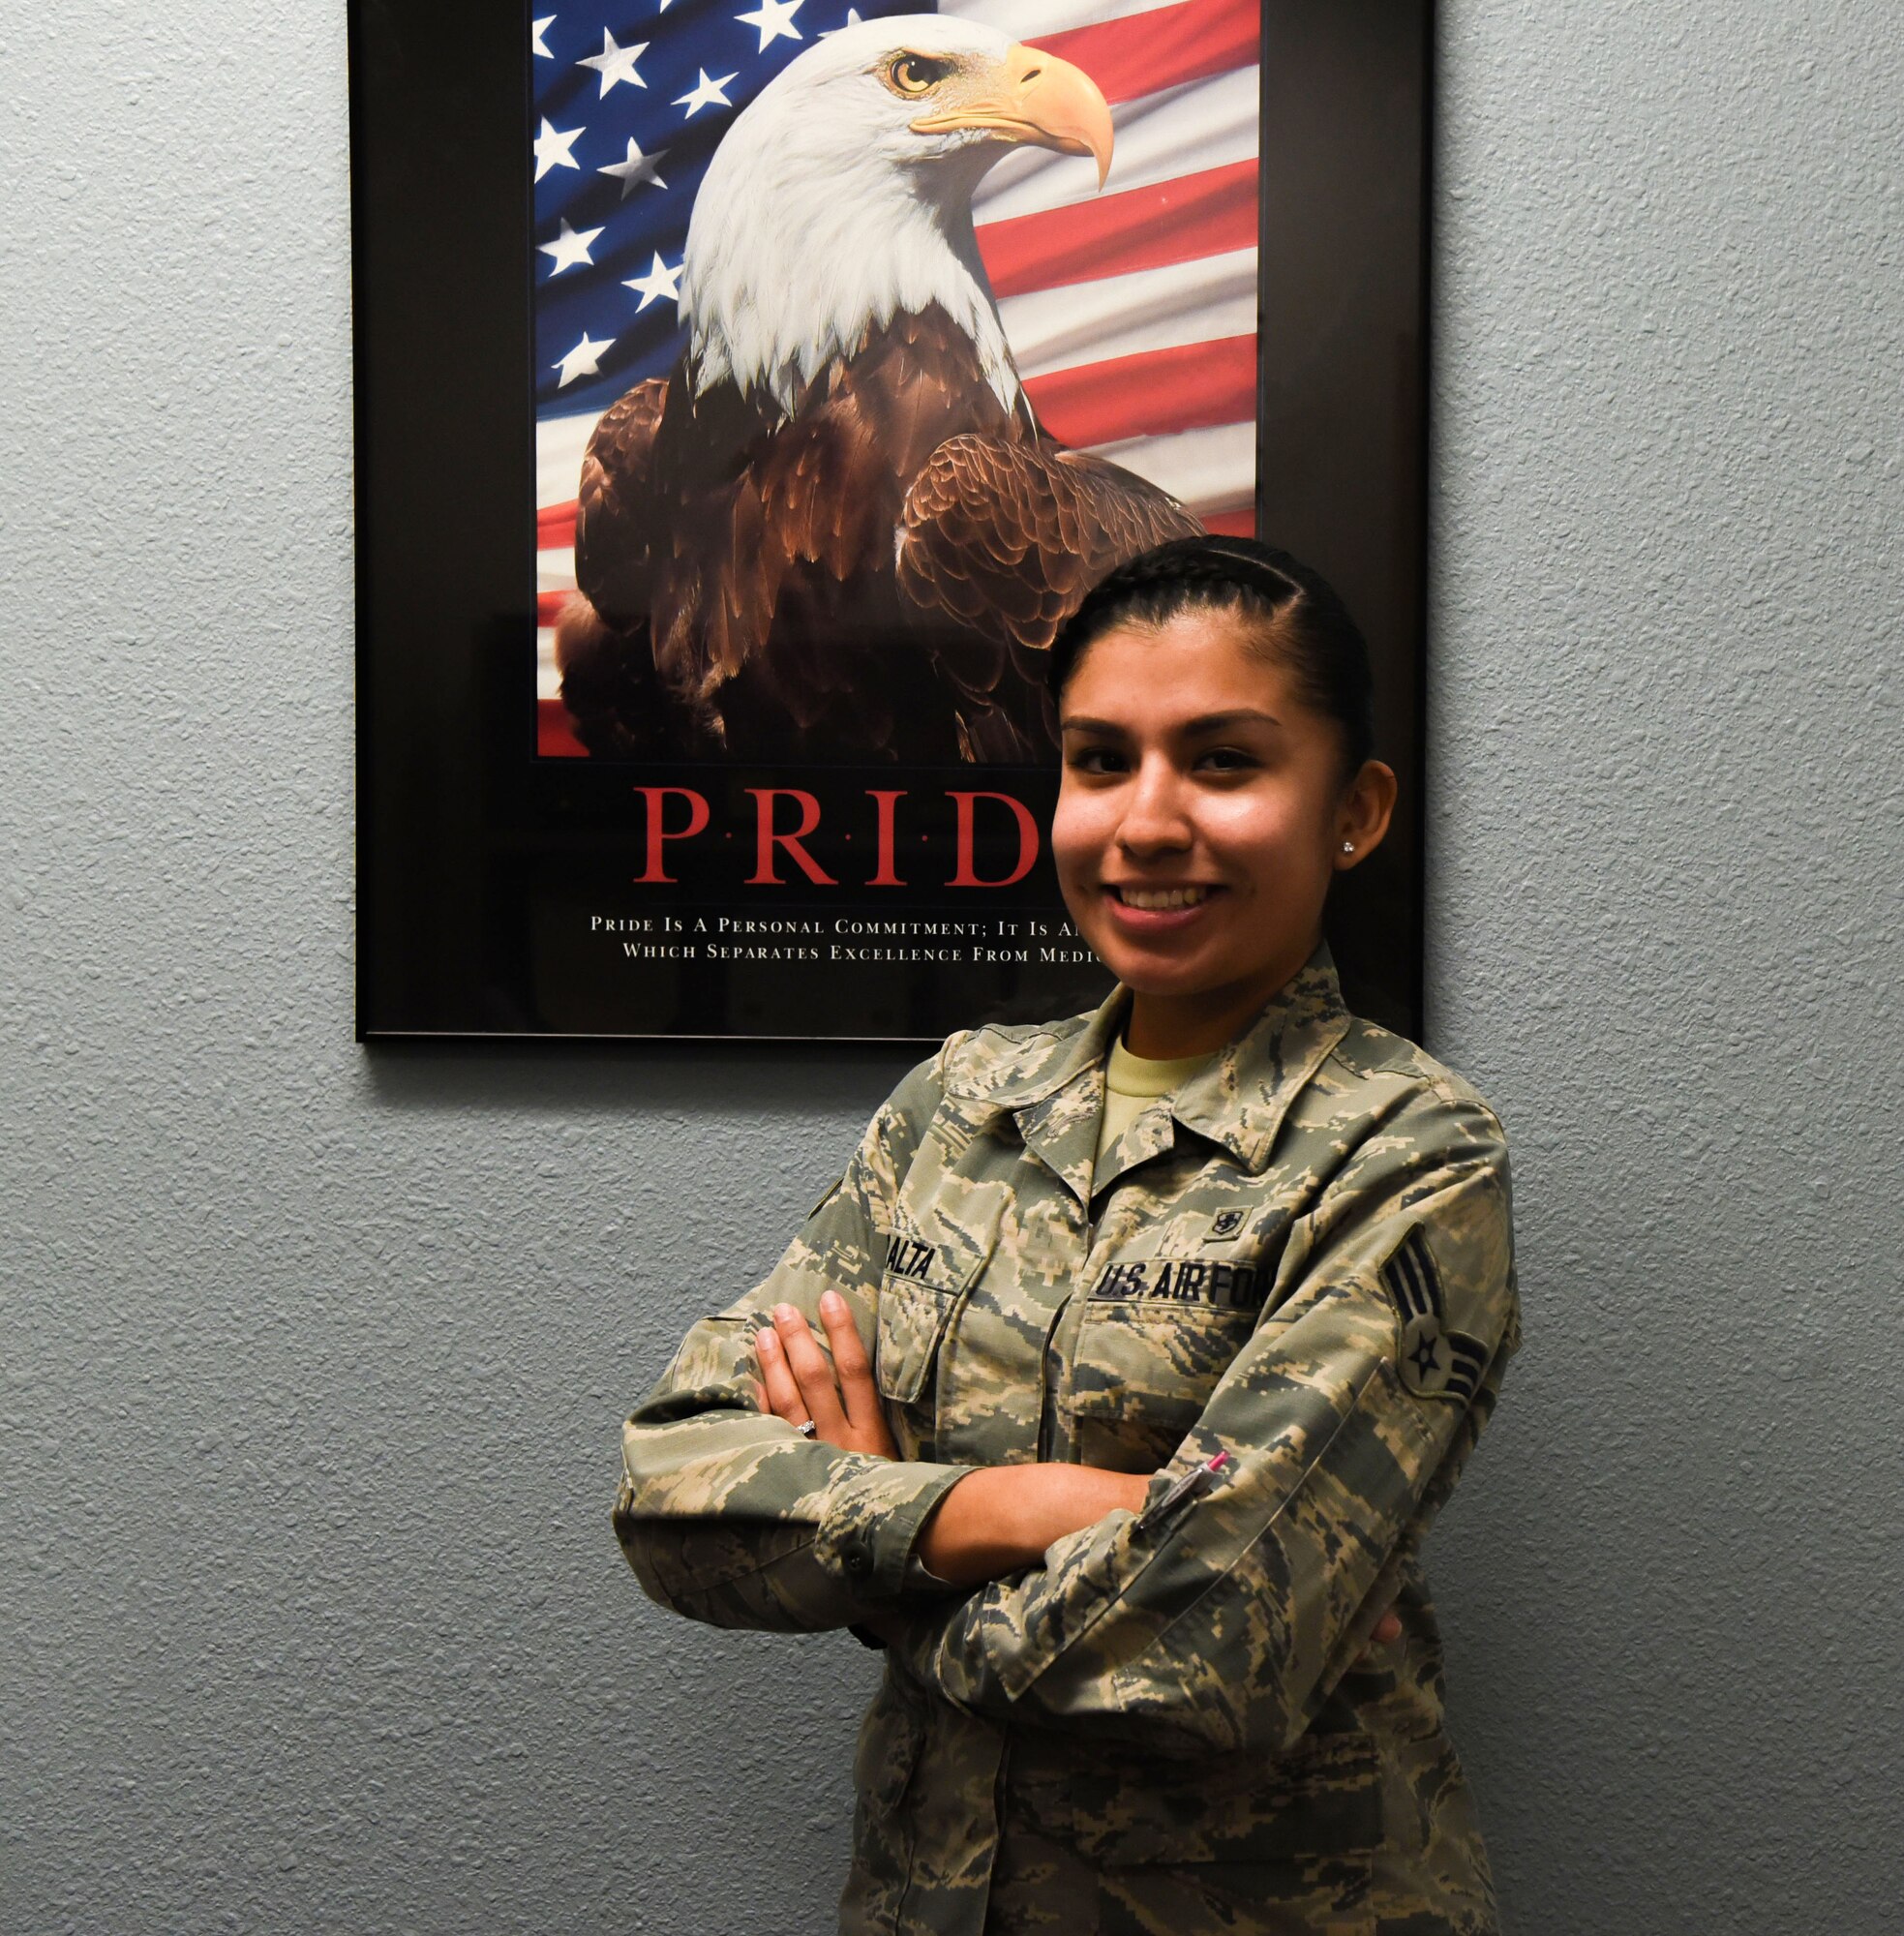 Senior Airman Erika Peralta, 90th Medical Group mental health technician, poses for a photo at F.E. Warren Air Force Base, Wyo., Nov. 15, 2017. Peralta makes the initial contact with patients in order to help them heal from invisible wounds.